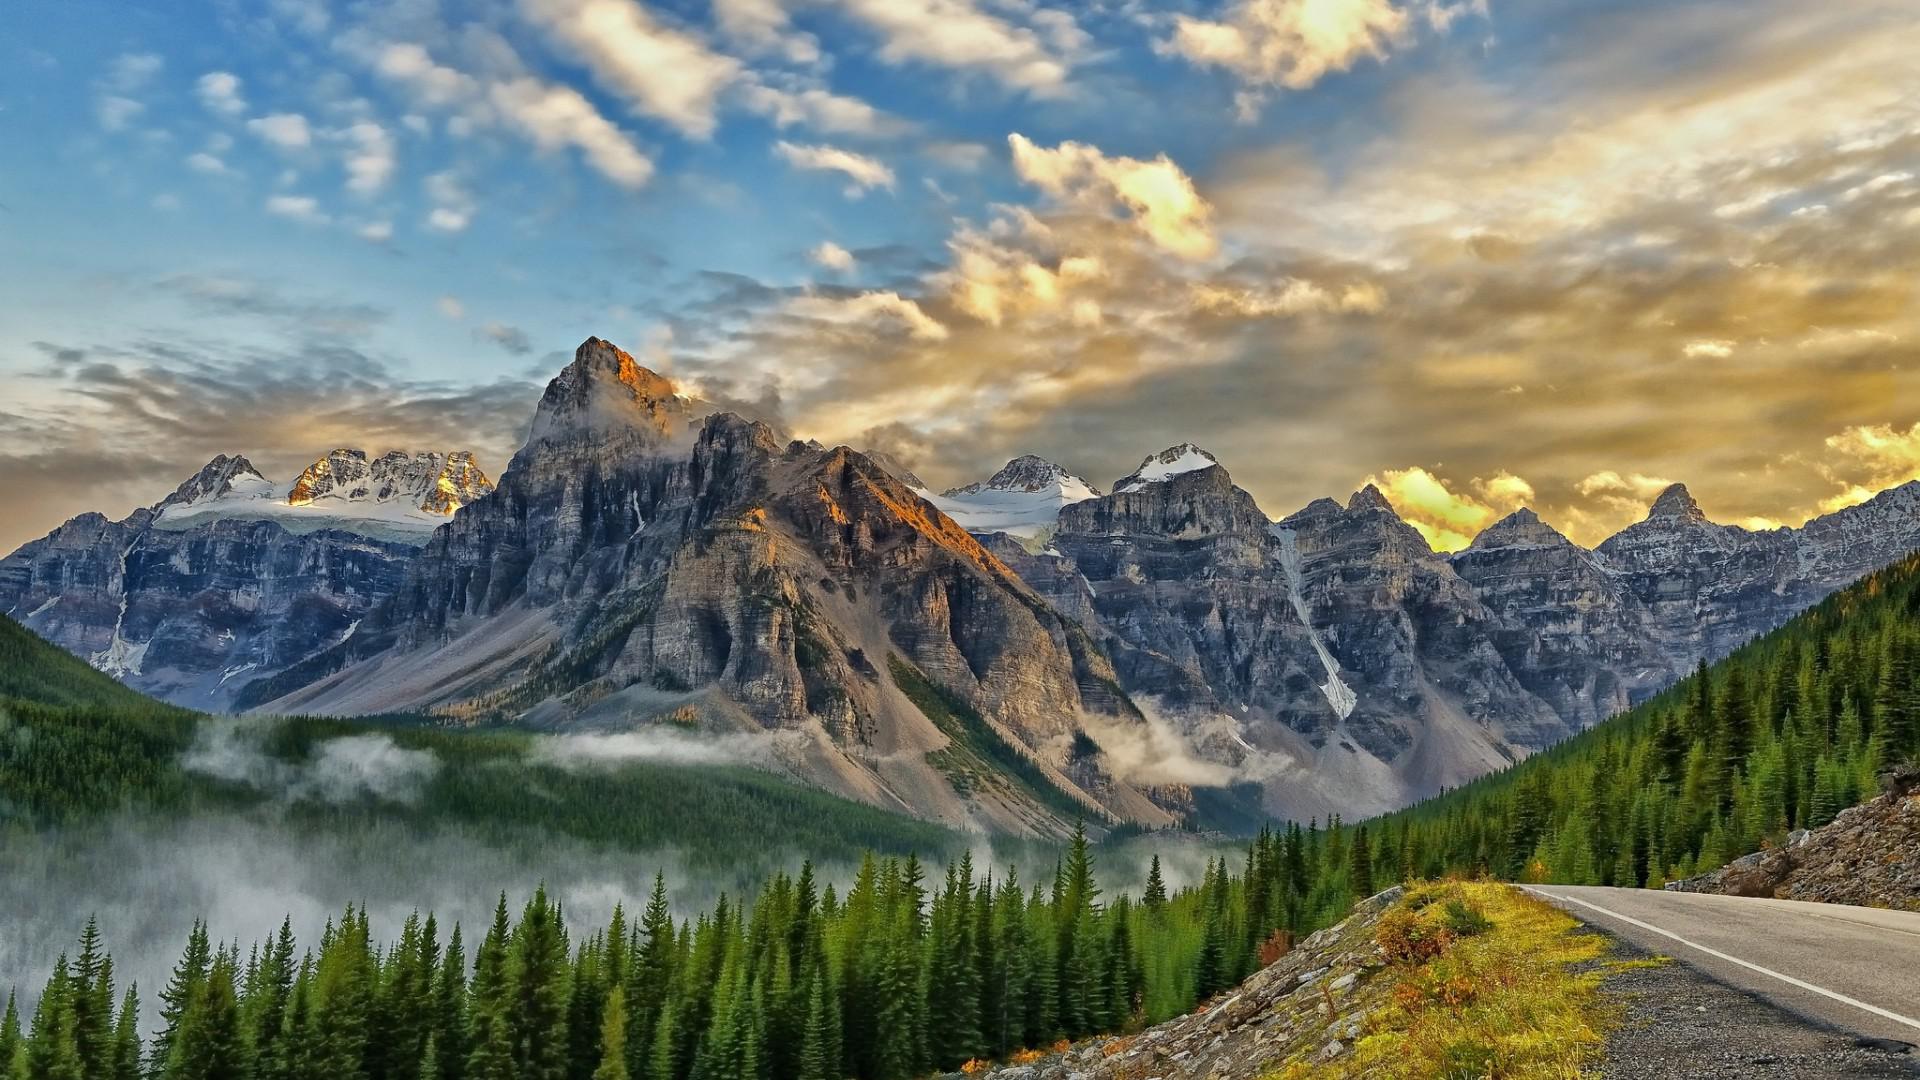 Vacation in the mountains Wallpaper